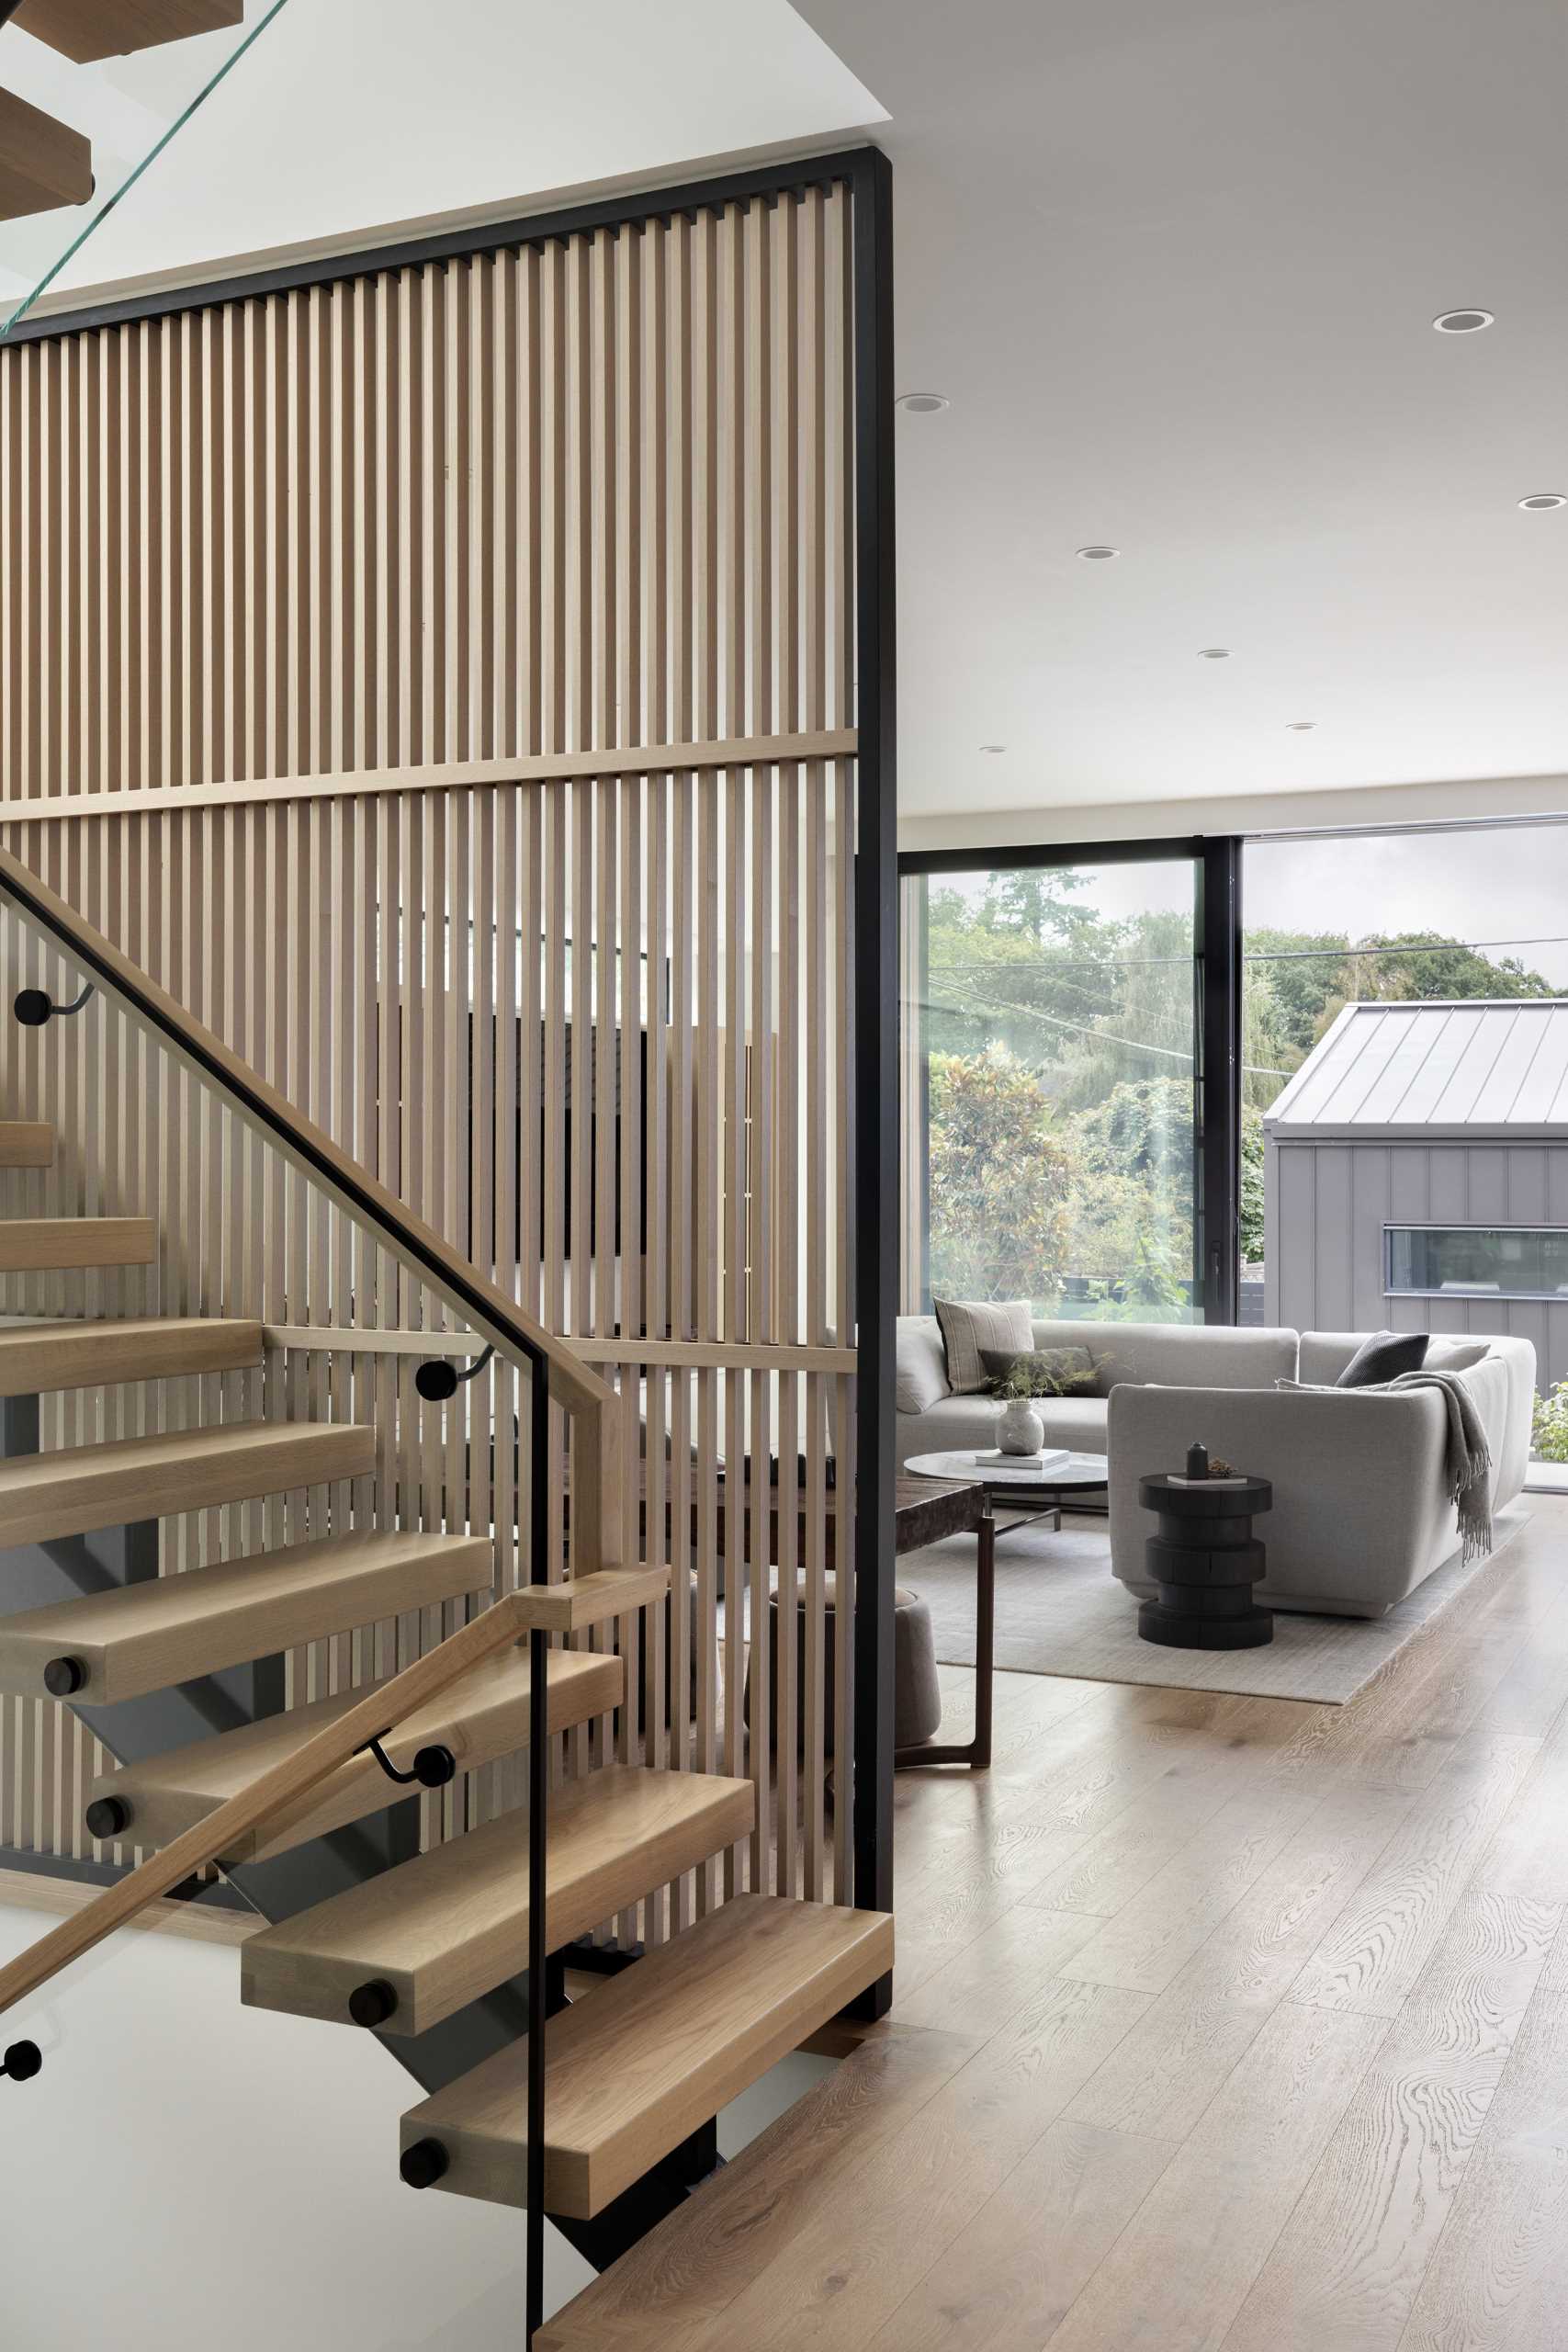 Wood and metal stairs, alongside a wood partition, lead to the basement and the upper level of this modern home.